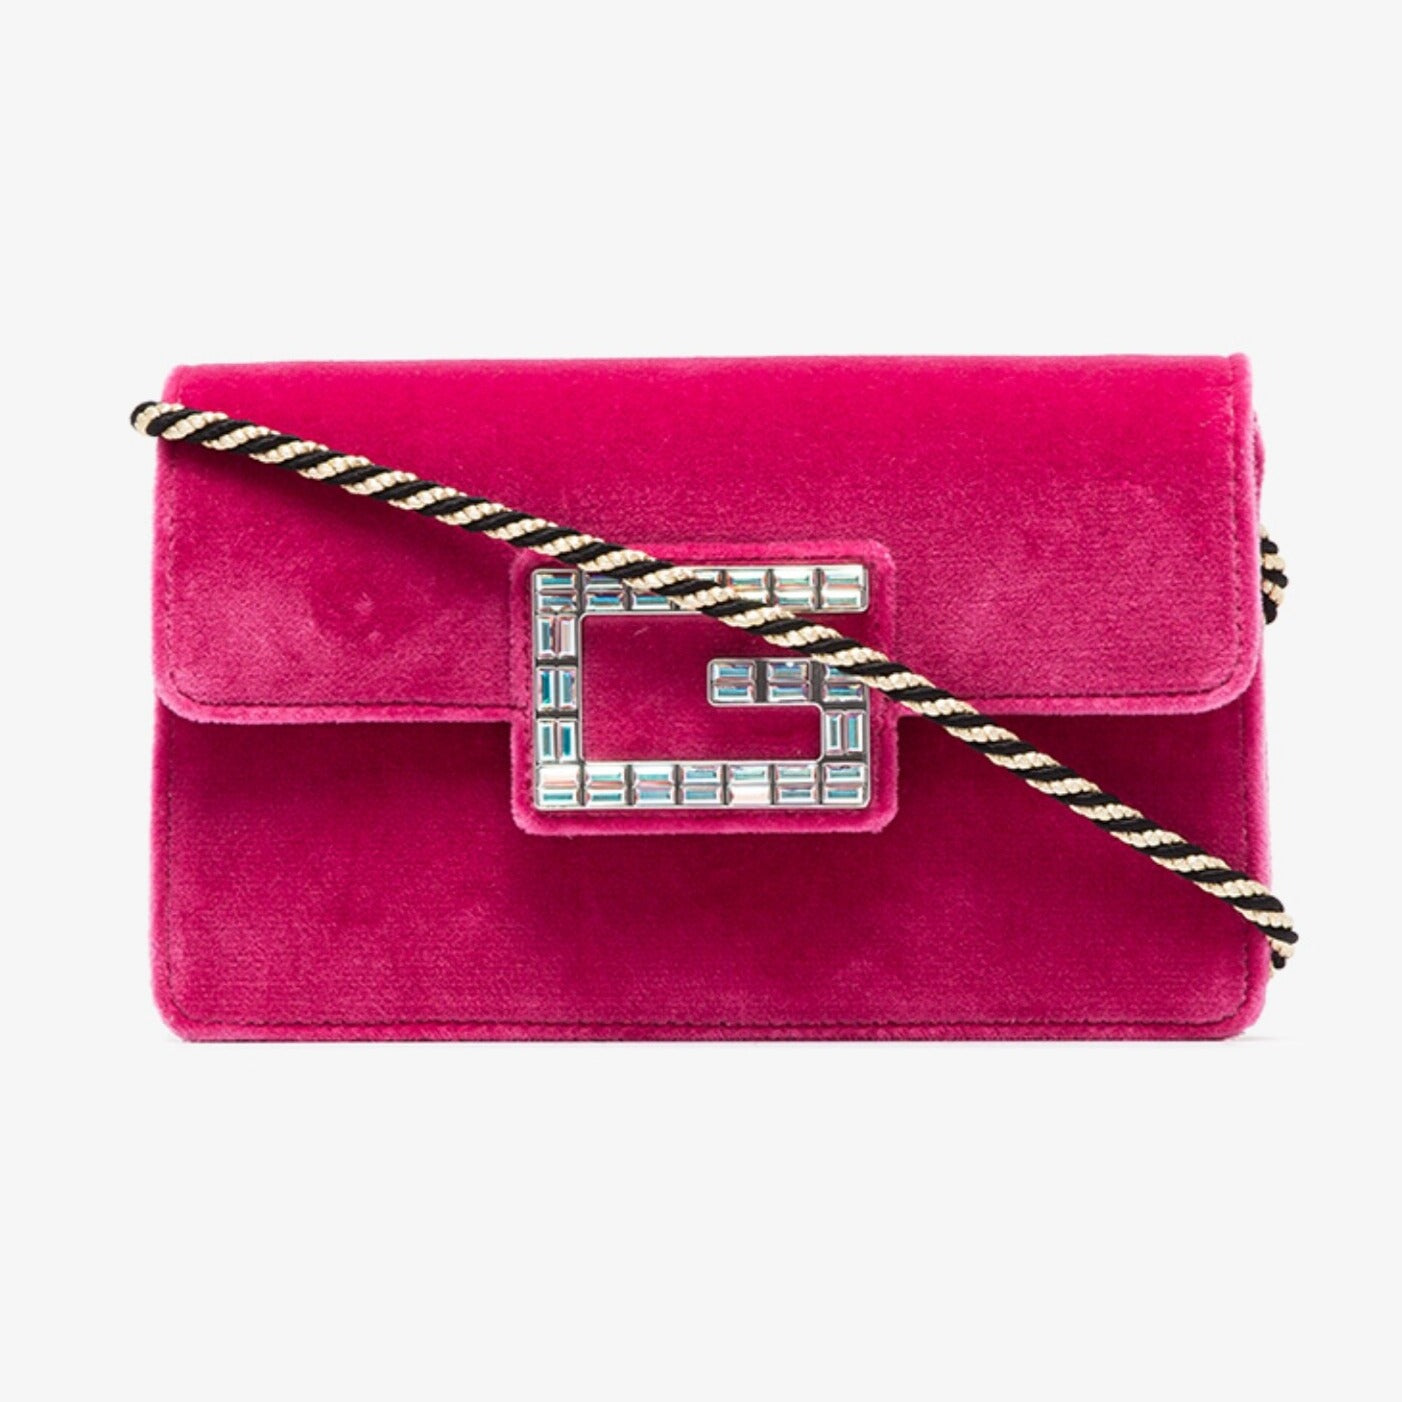 NWT GUCCI BROADWAY PEARL BEE PINK CROSSBODY BAG MARMONT GUCCY GUCCISSIMA NEW